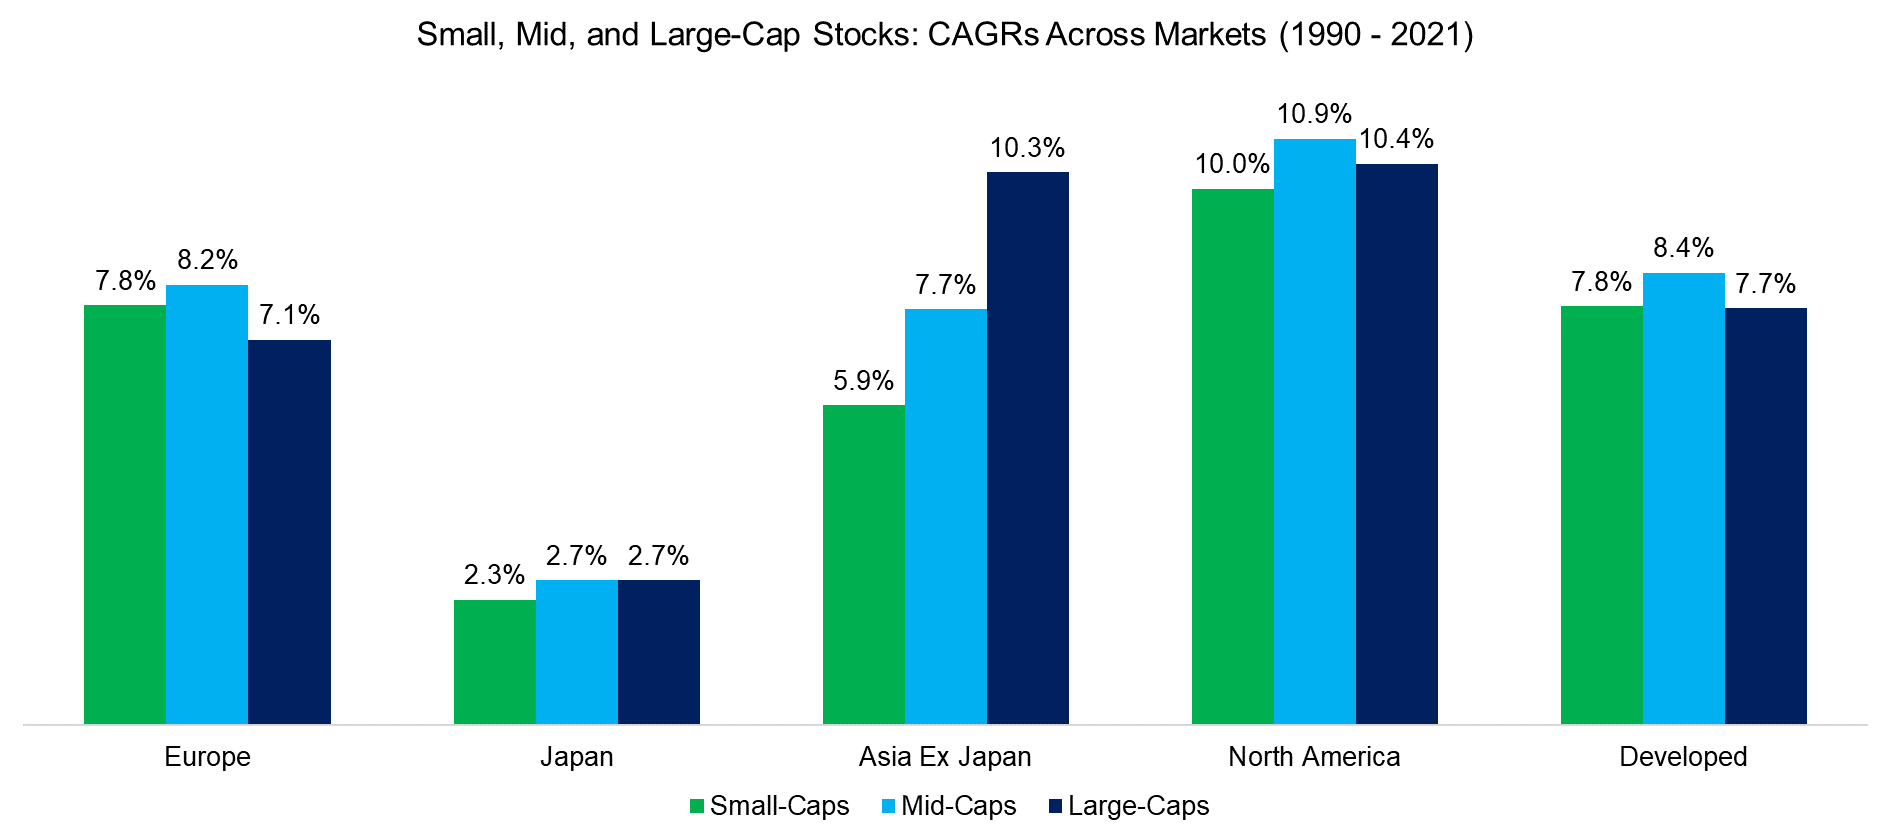 Small, Mid, and Large-Cap Stocks CAGRs Across Markets (1990 - 2021)